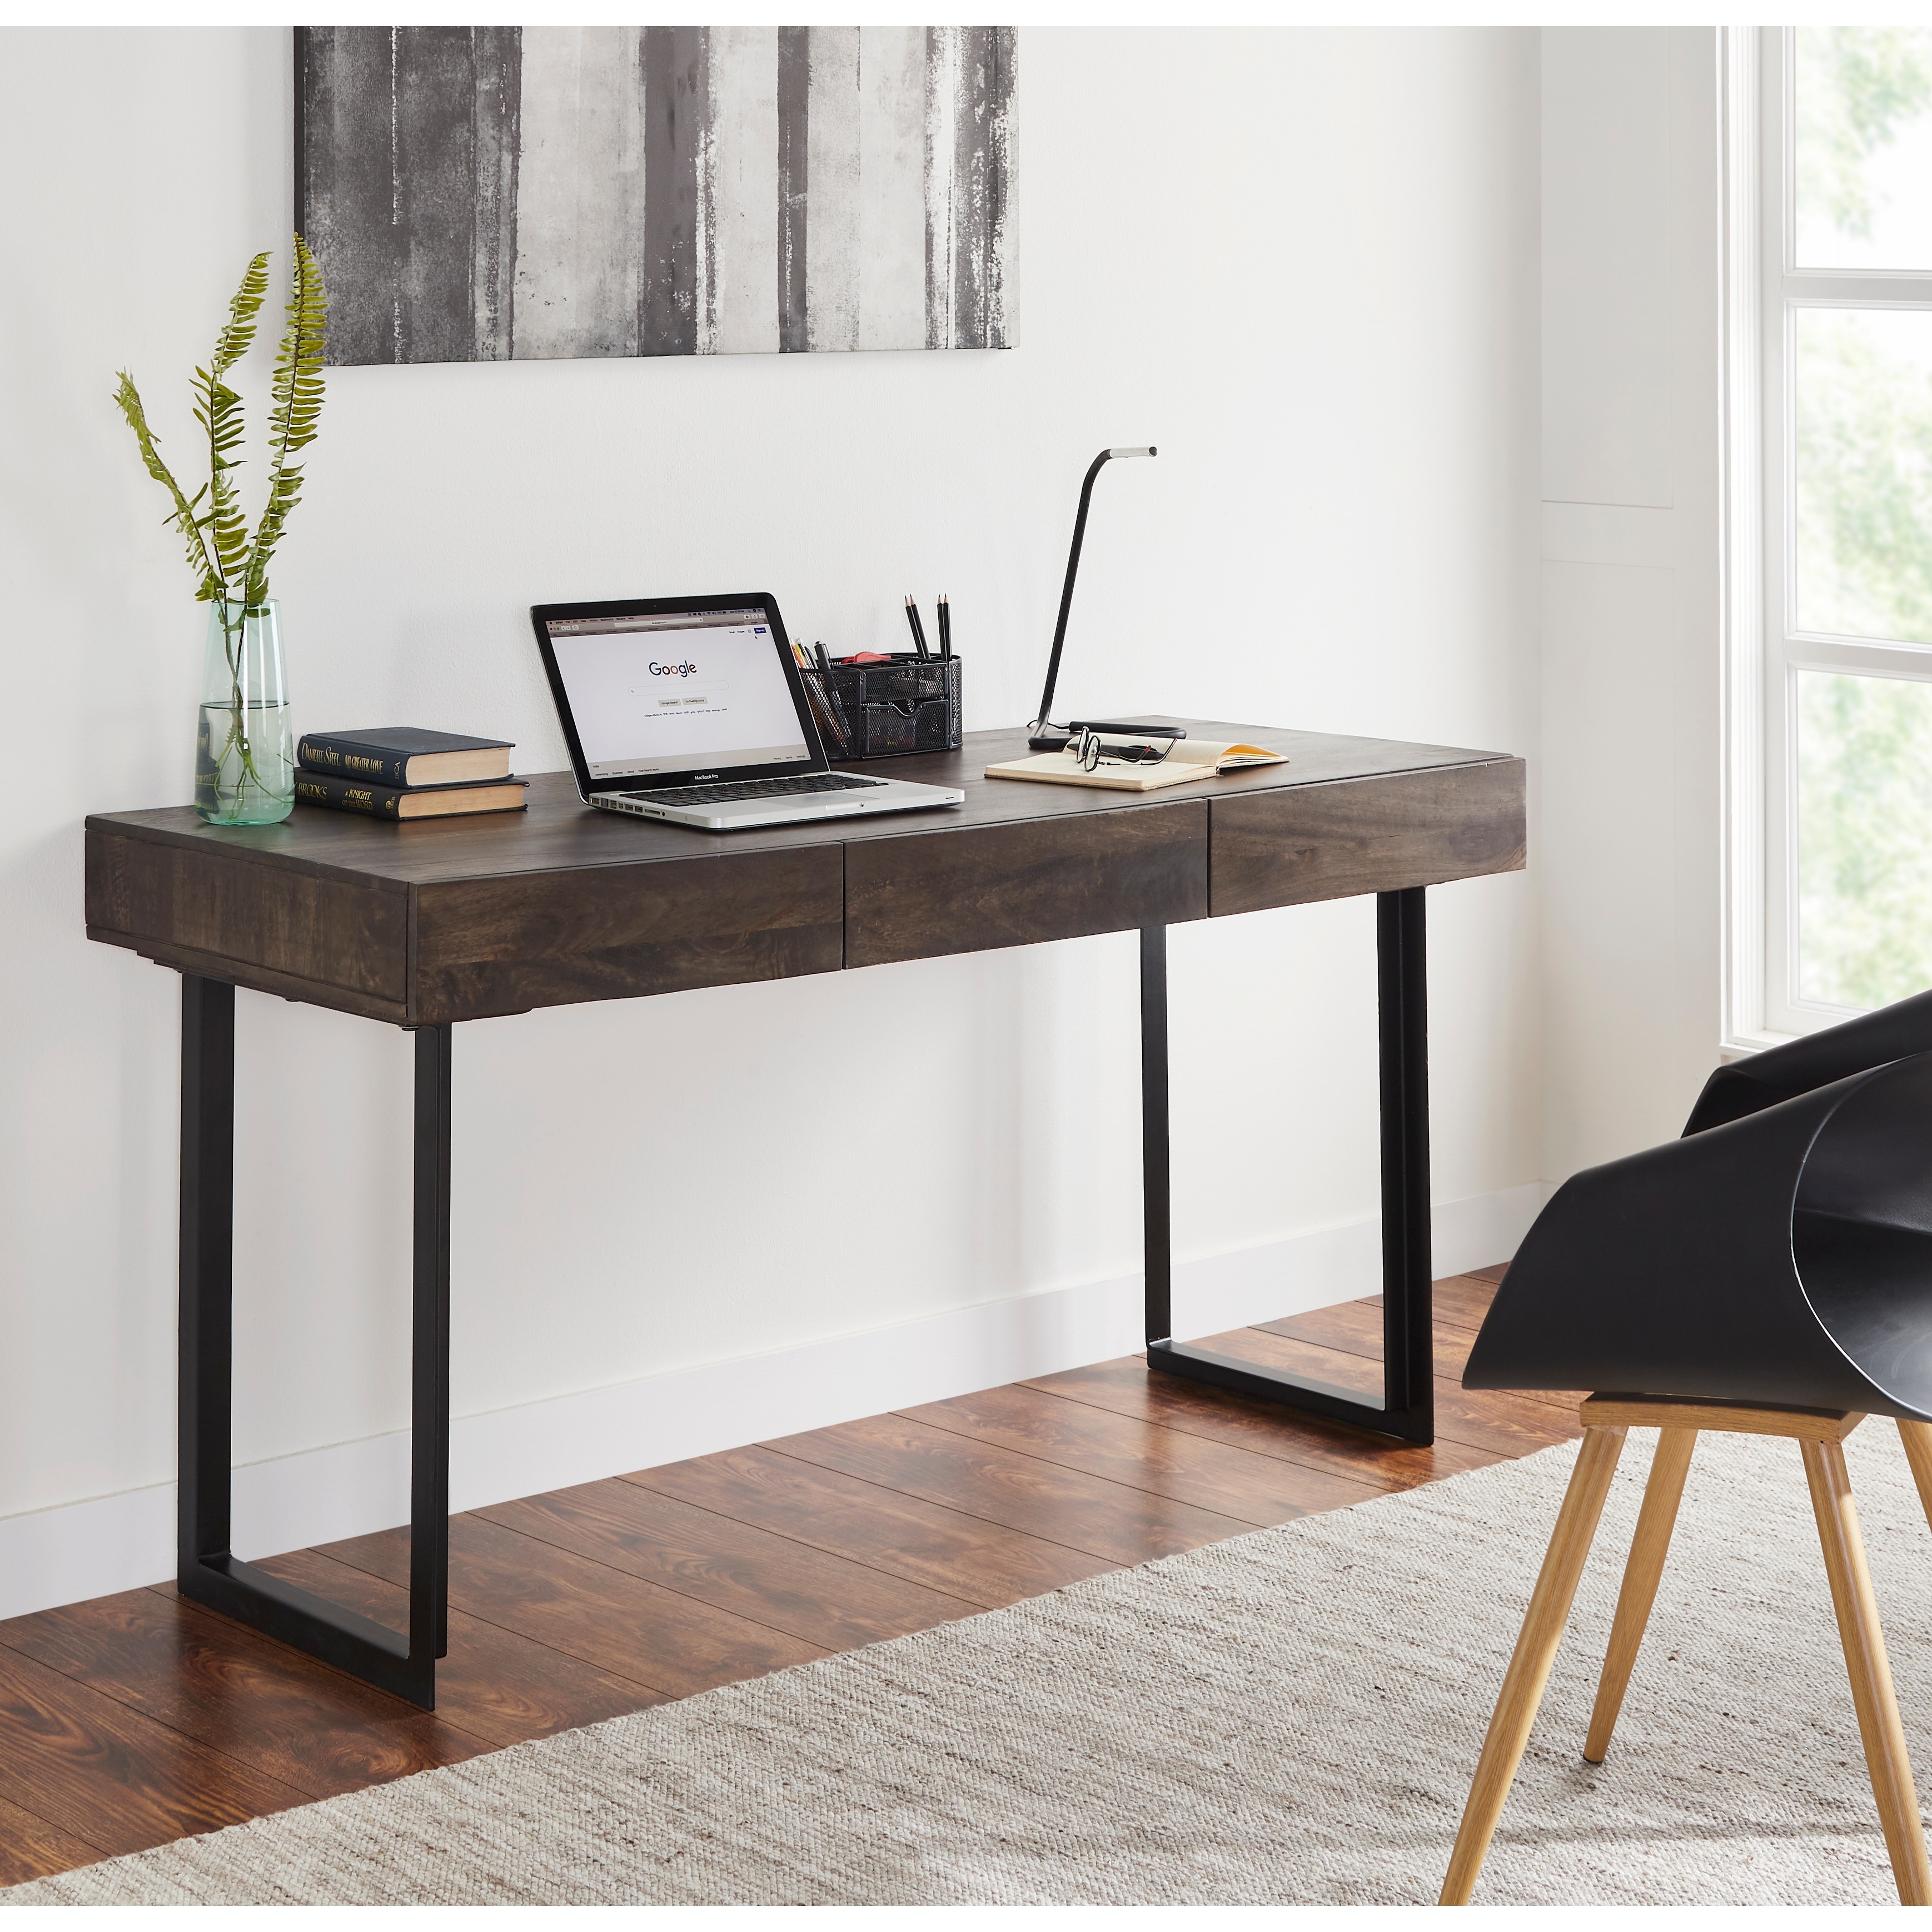 Glide Modern 3-drawer Wood and Metal Office Desk, 58-inches wide